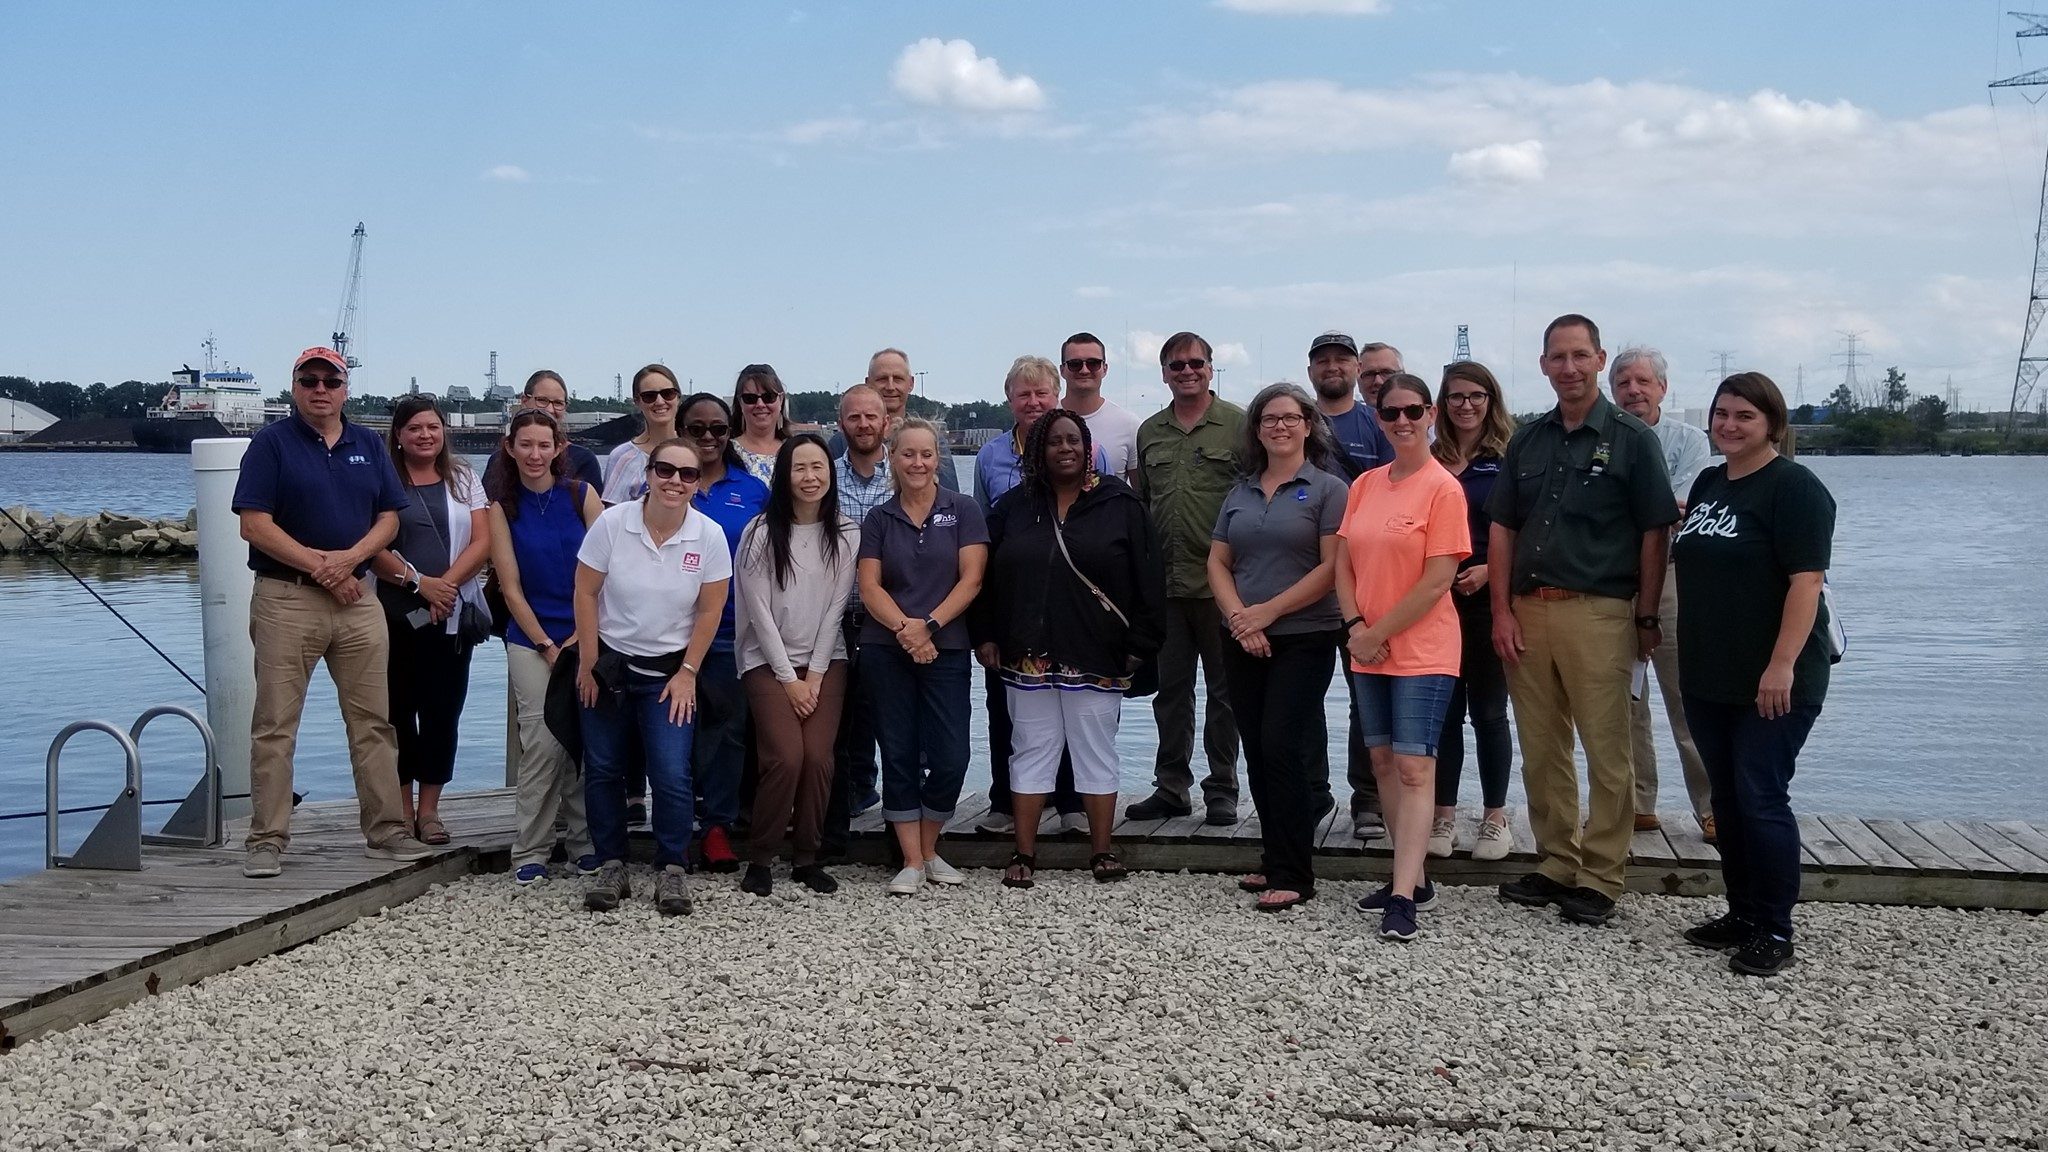 Members of the Maumee AOC Advisory Committee post in front of the Maumee River in 2021. Credit: Partners for Clean Streams